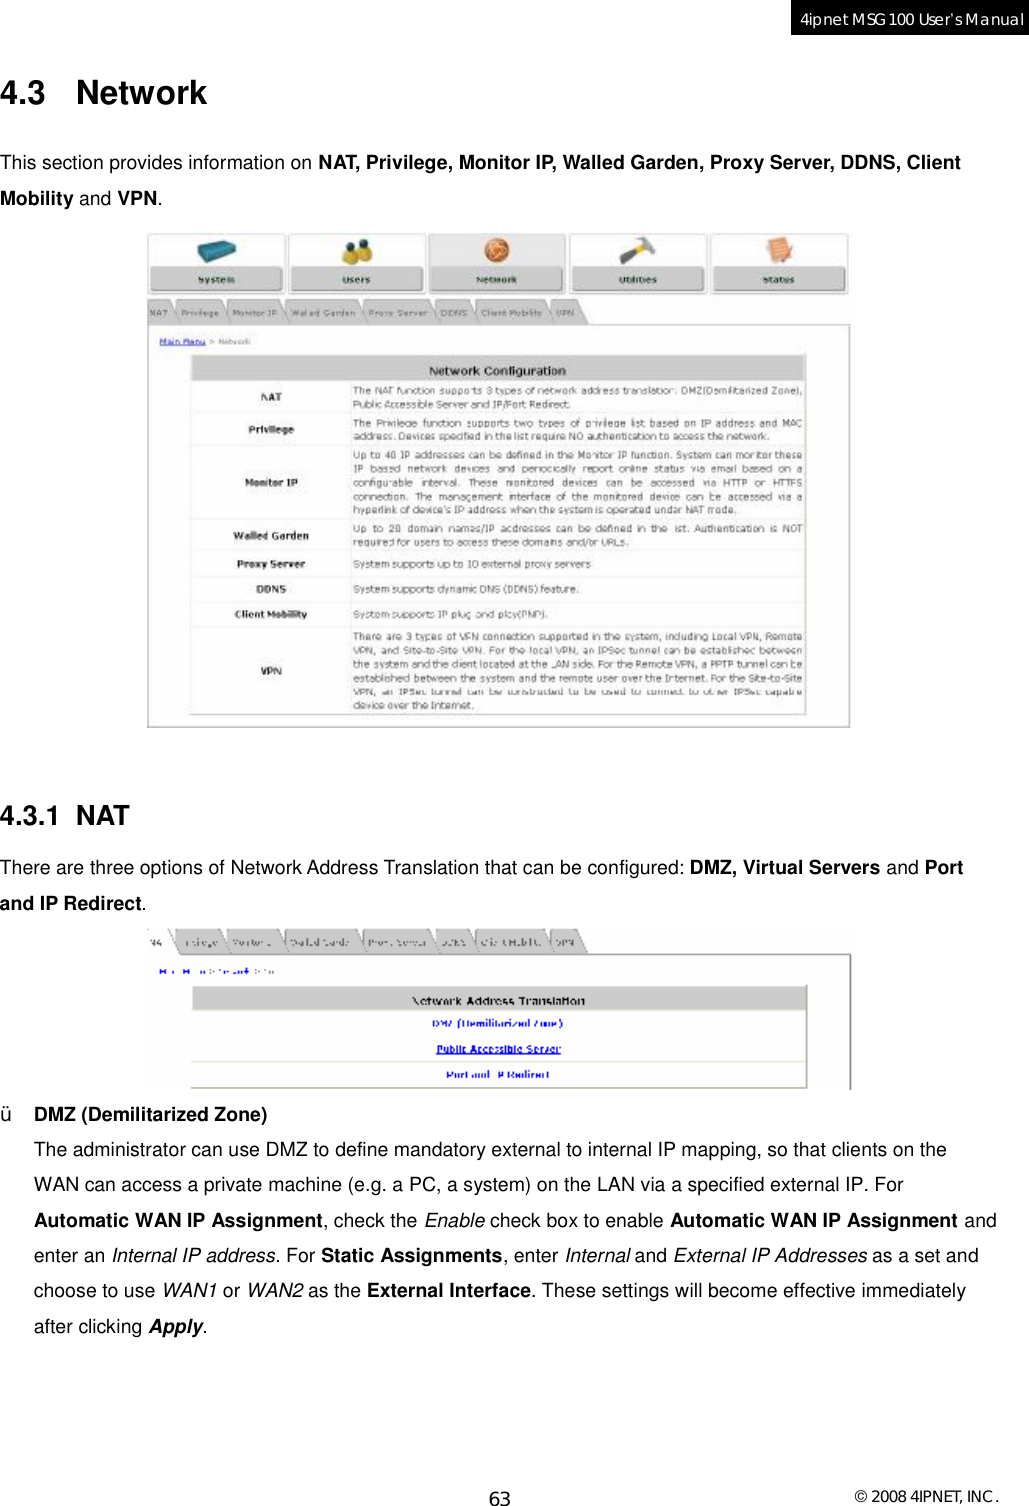  © 2008 4IPNET, INC. 63 4ipnet MSG100 User’s Manual  4.3 Network This section provides information on NAT, Privilege, Monitor IP, Walled Garden, Proxy Server, DDNS, Client Mobility and VPN.    4.3.1 NAT There are three options of Network Address Translation that can be configured: DMZ, Virtual Servers and Port and IP Redirect.   Ÿ DMZ (Demilitarized Zone) The administrator can use DMZ to define mandatory external to internal IP mapping, so that clients on the WAN can access a private machine (e.g. a PC, a system) on the LAN via a specified external IP. For Automatic WAN IP Assignment, check the Enable check box to enable Automatic WAN IP Assignment and enter an Internal IP address. For Static Assignments, enter Internal and External IP Addresses as a set and choose to use WAN1 or WAN2 as the External Interface. These settings will become effective immediately after clicking Apply. 